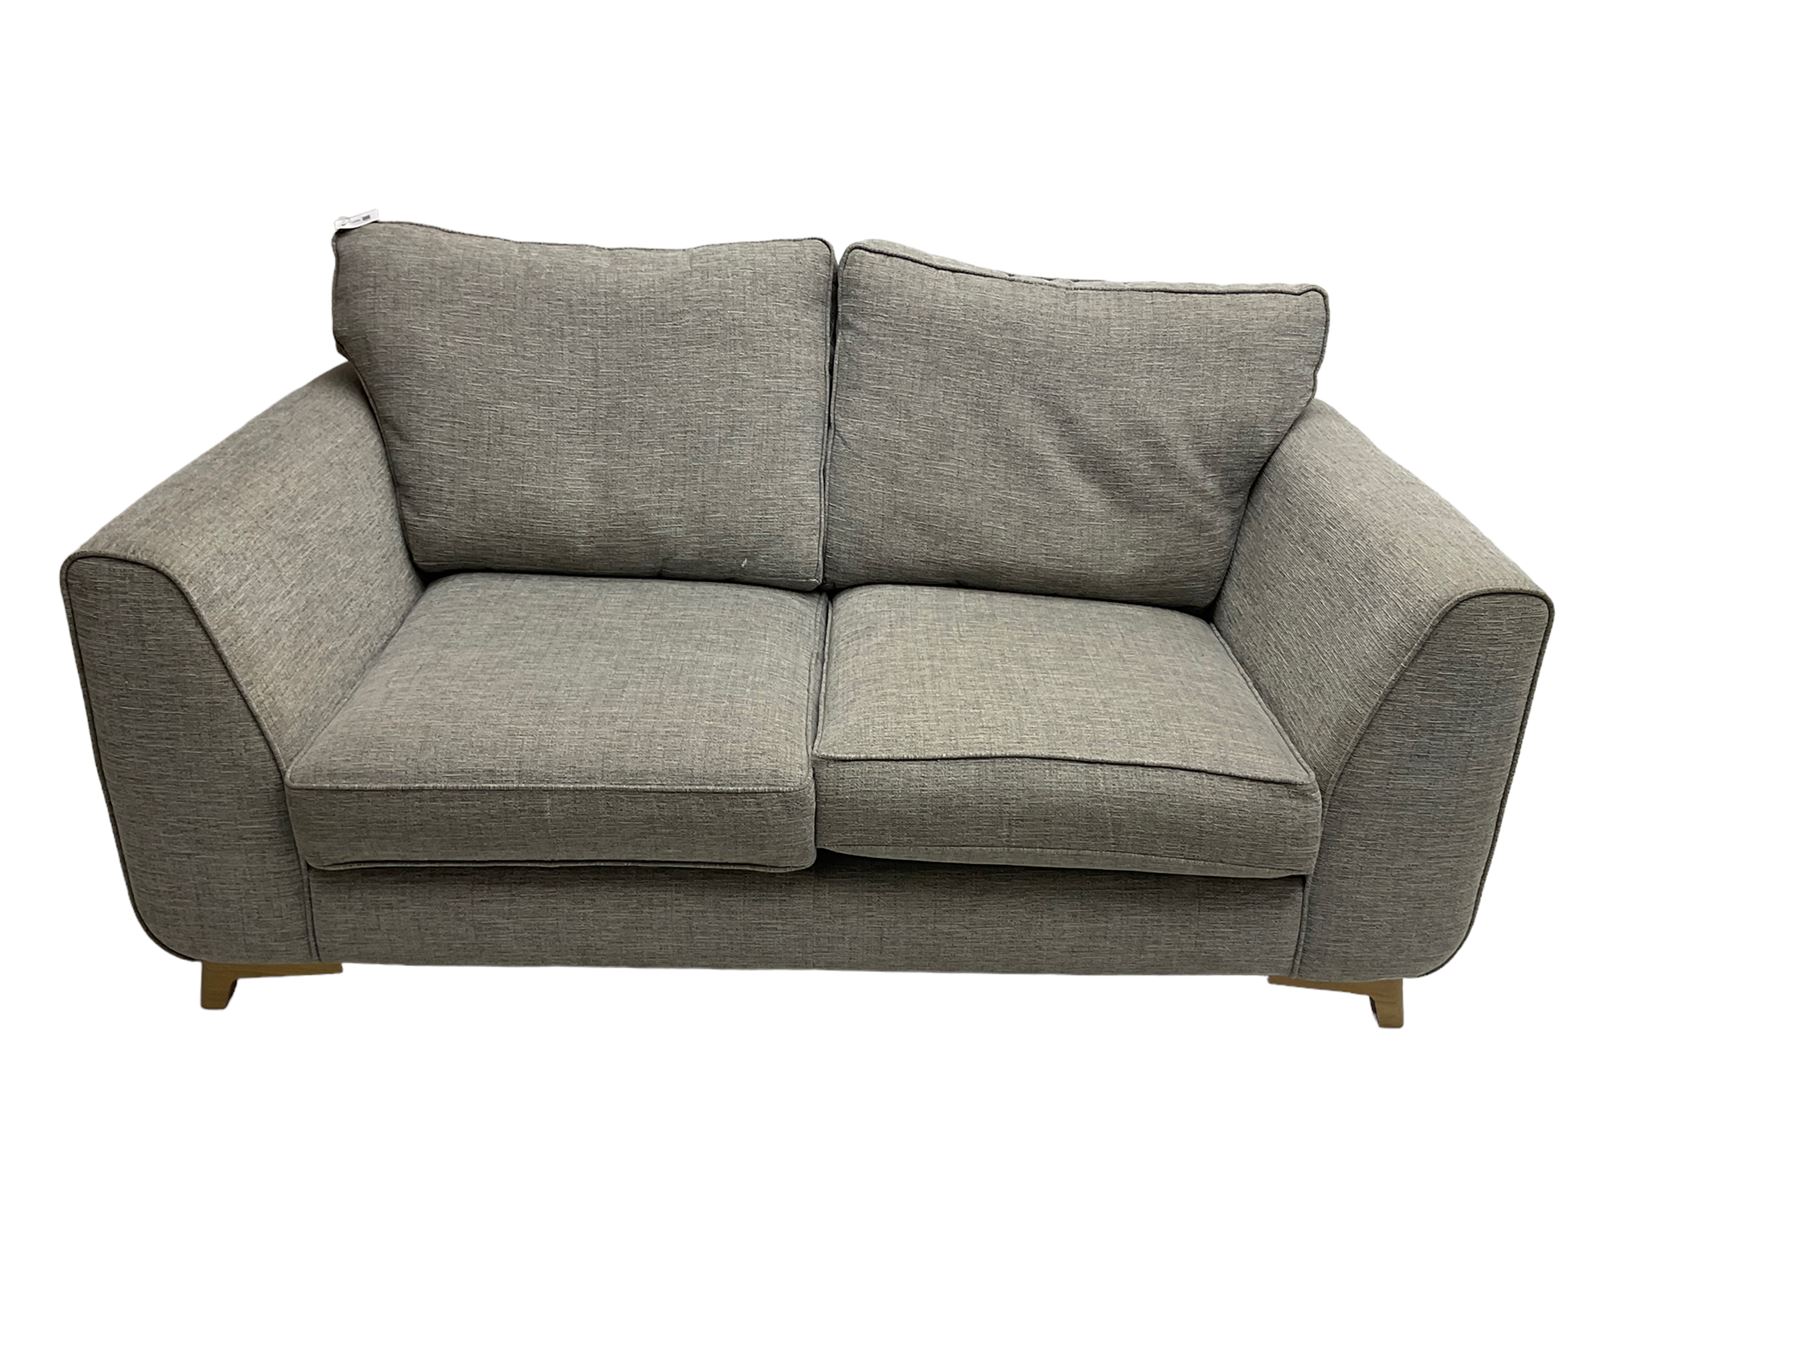 Two seat sofa upholstered in graphite grey fabric - Image 2 of 7